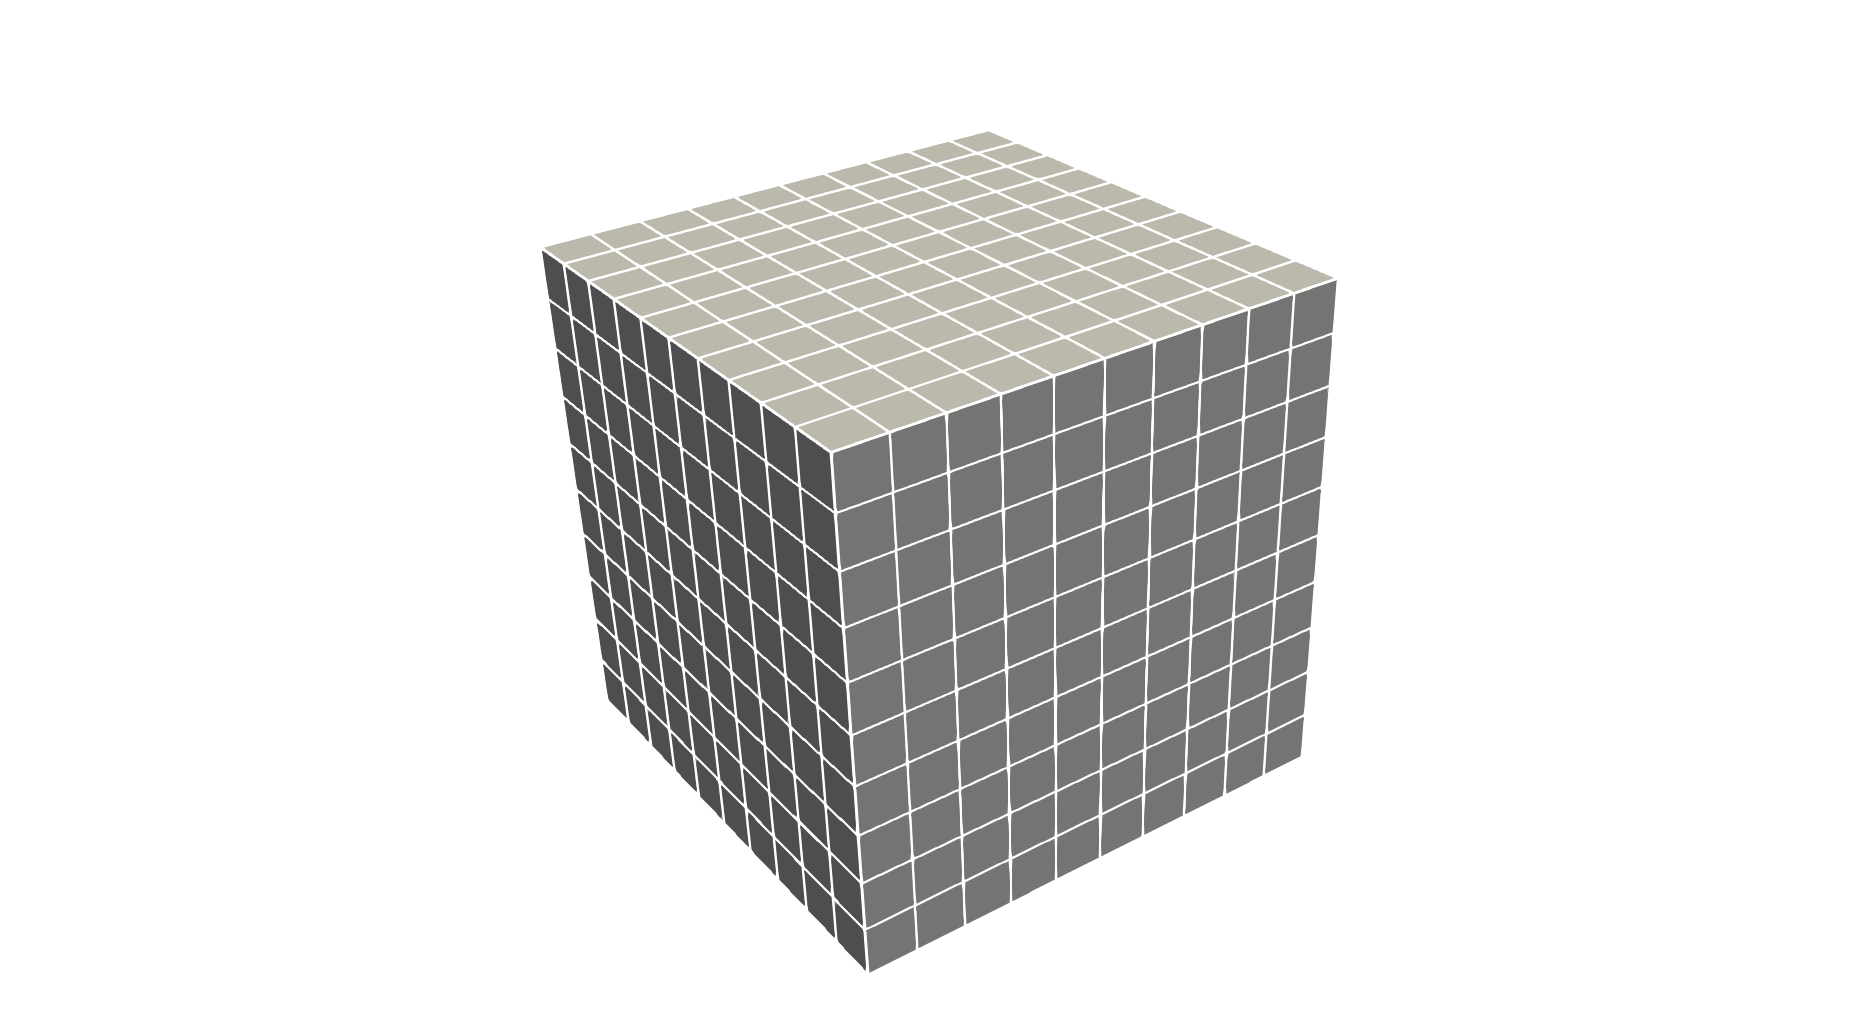 ../../../../_images/cube_mesh_10x10x10.png